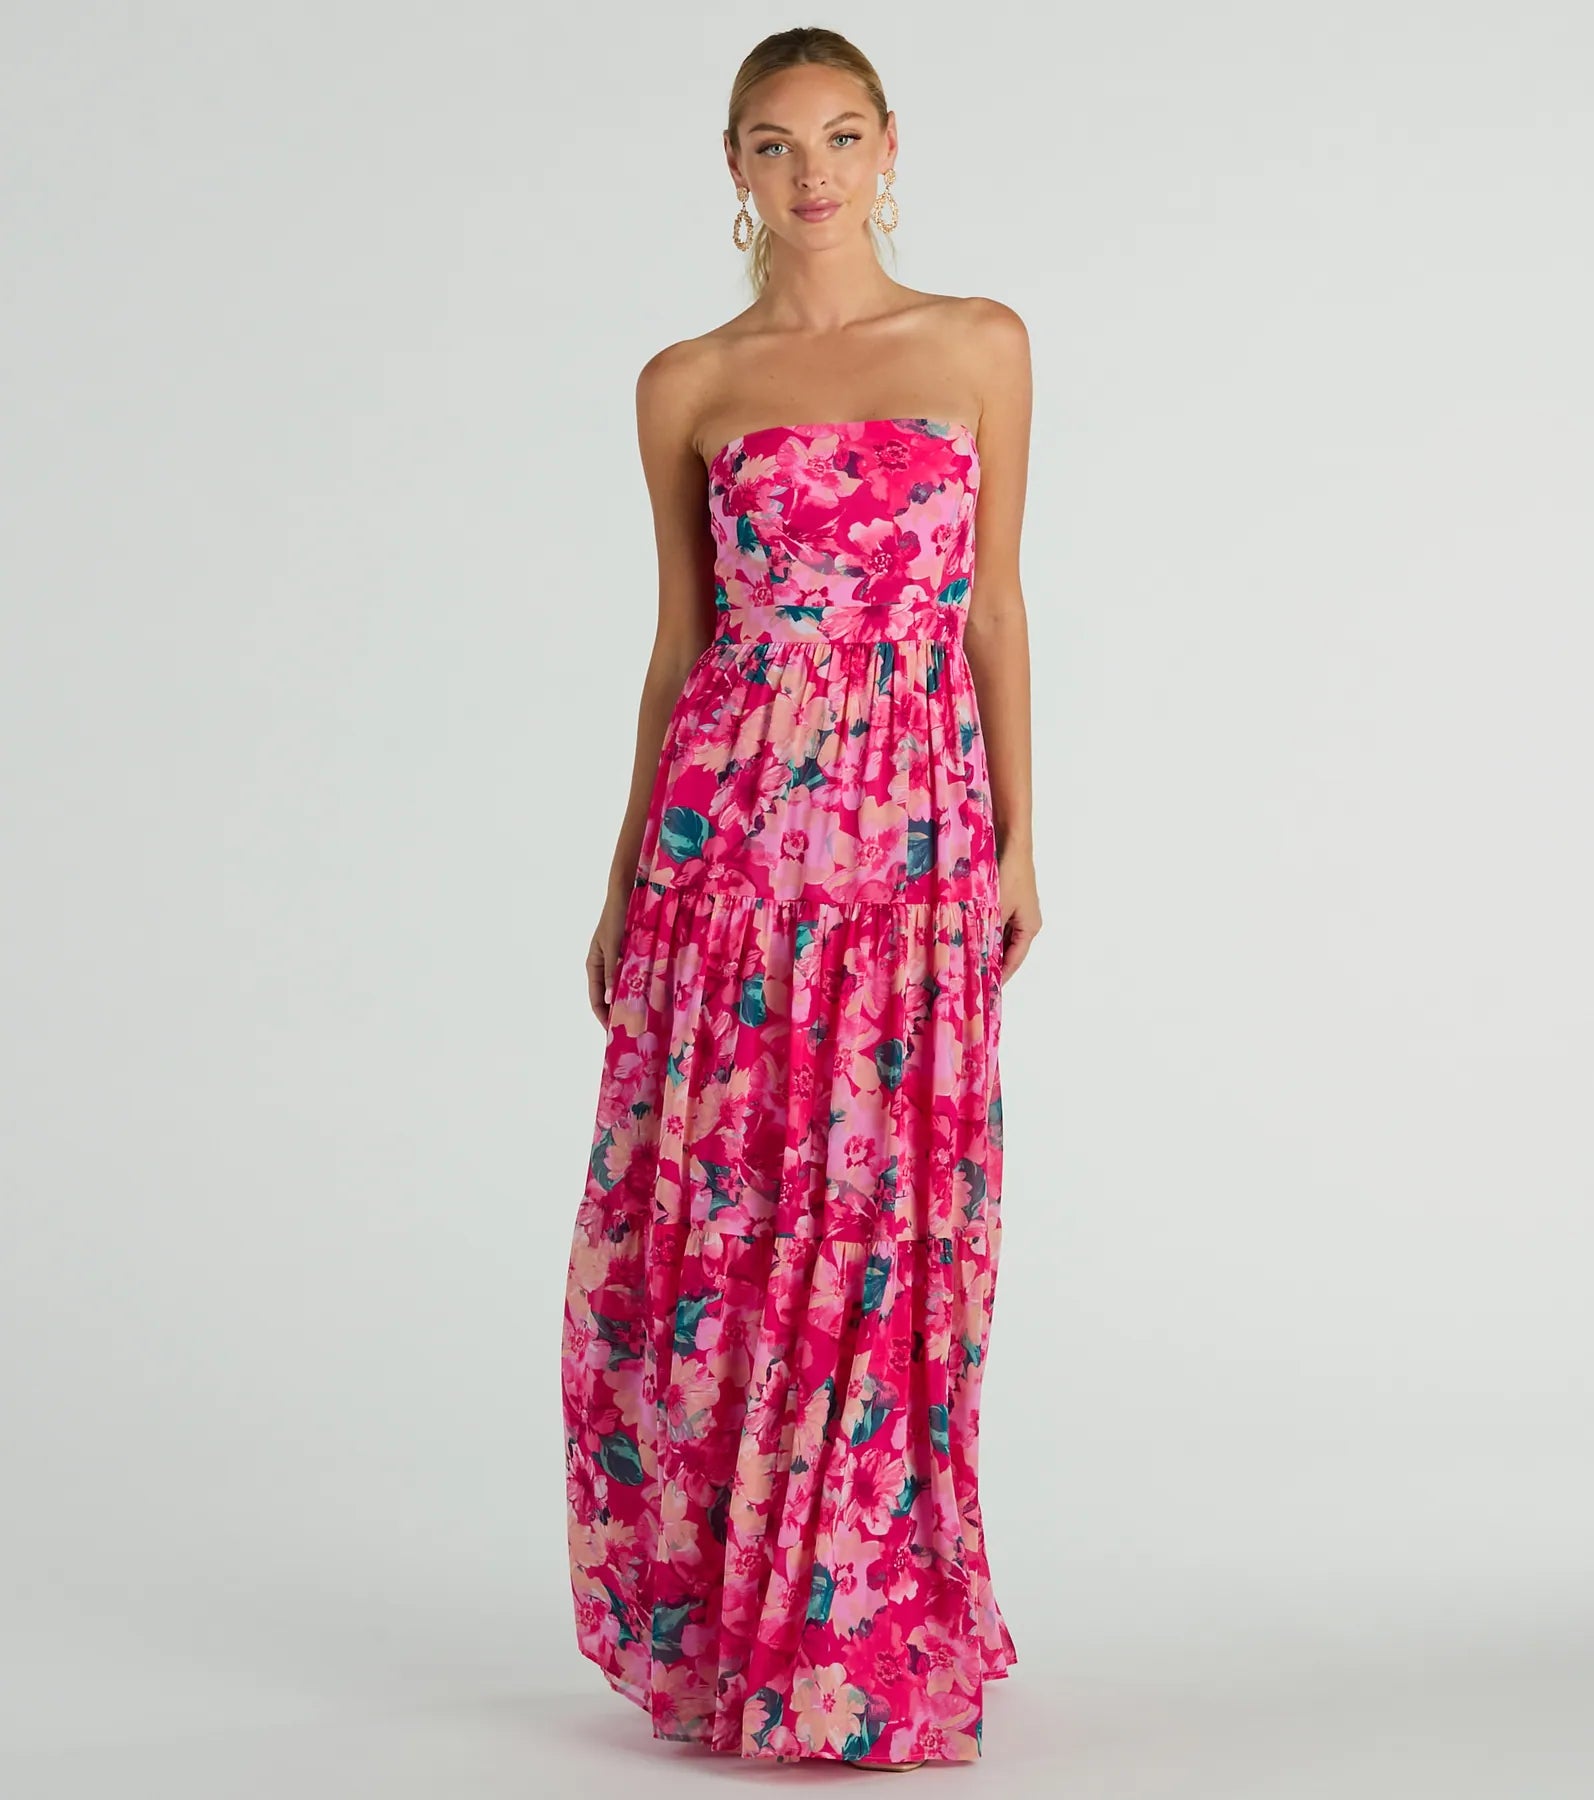 Strapless Floral Print Flowy Stretchy Back Zipper Maxi Dress With Ruffles